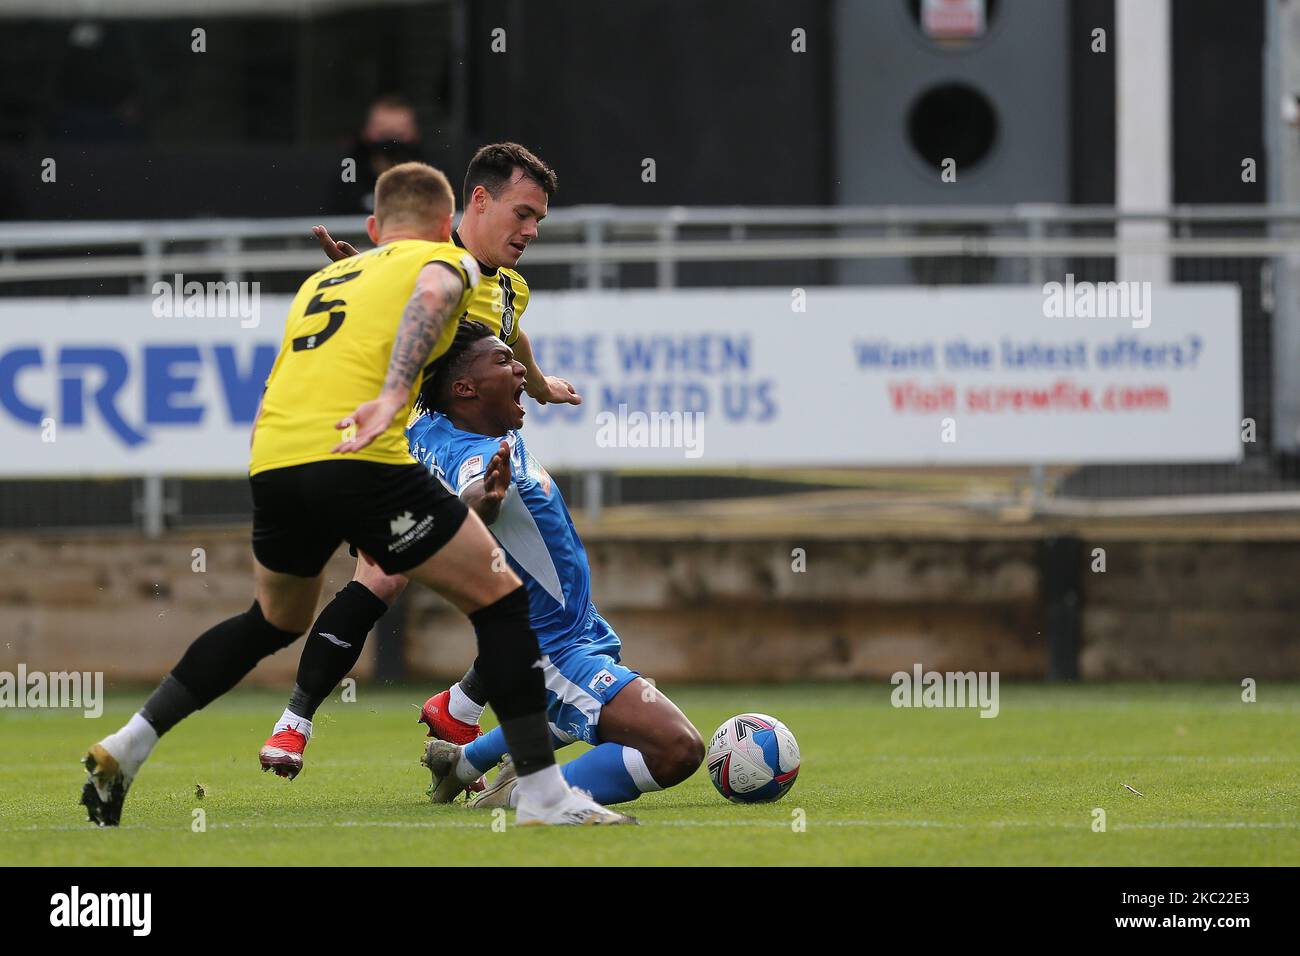 Kgosi Ntlhe of Barrow goes down in the penalty area after a challenge for Harrogate Town's Will Smith and Connor Hall uring the Sky Bet League 2 match between Harrogate Town and Barrow at Wetherby Road, Harrogate, England on 17th October 2020. (Photo by Mark Fletcher/MI News/NurPhoto) Stock Photo